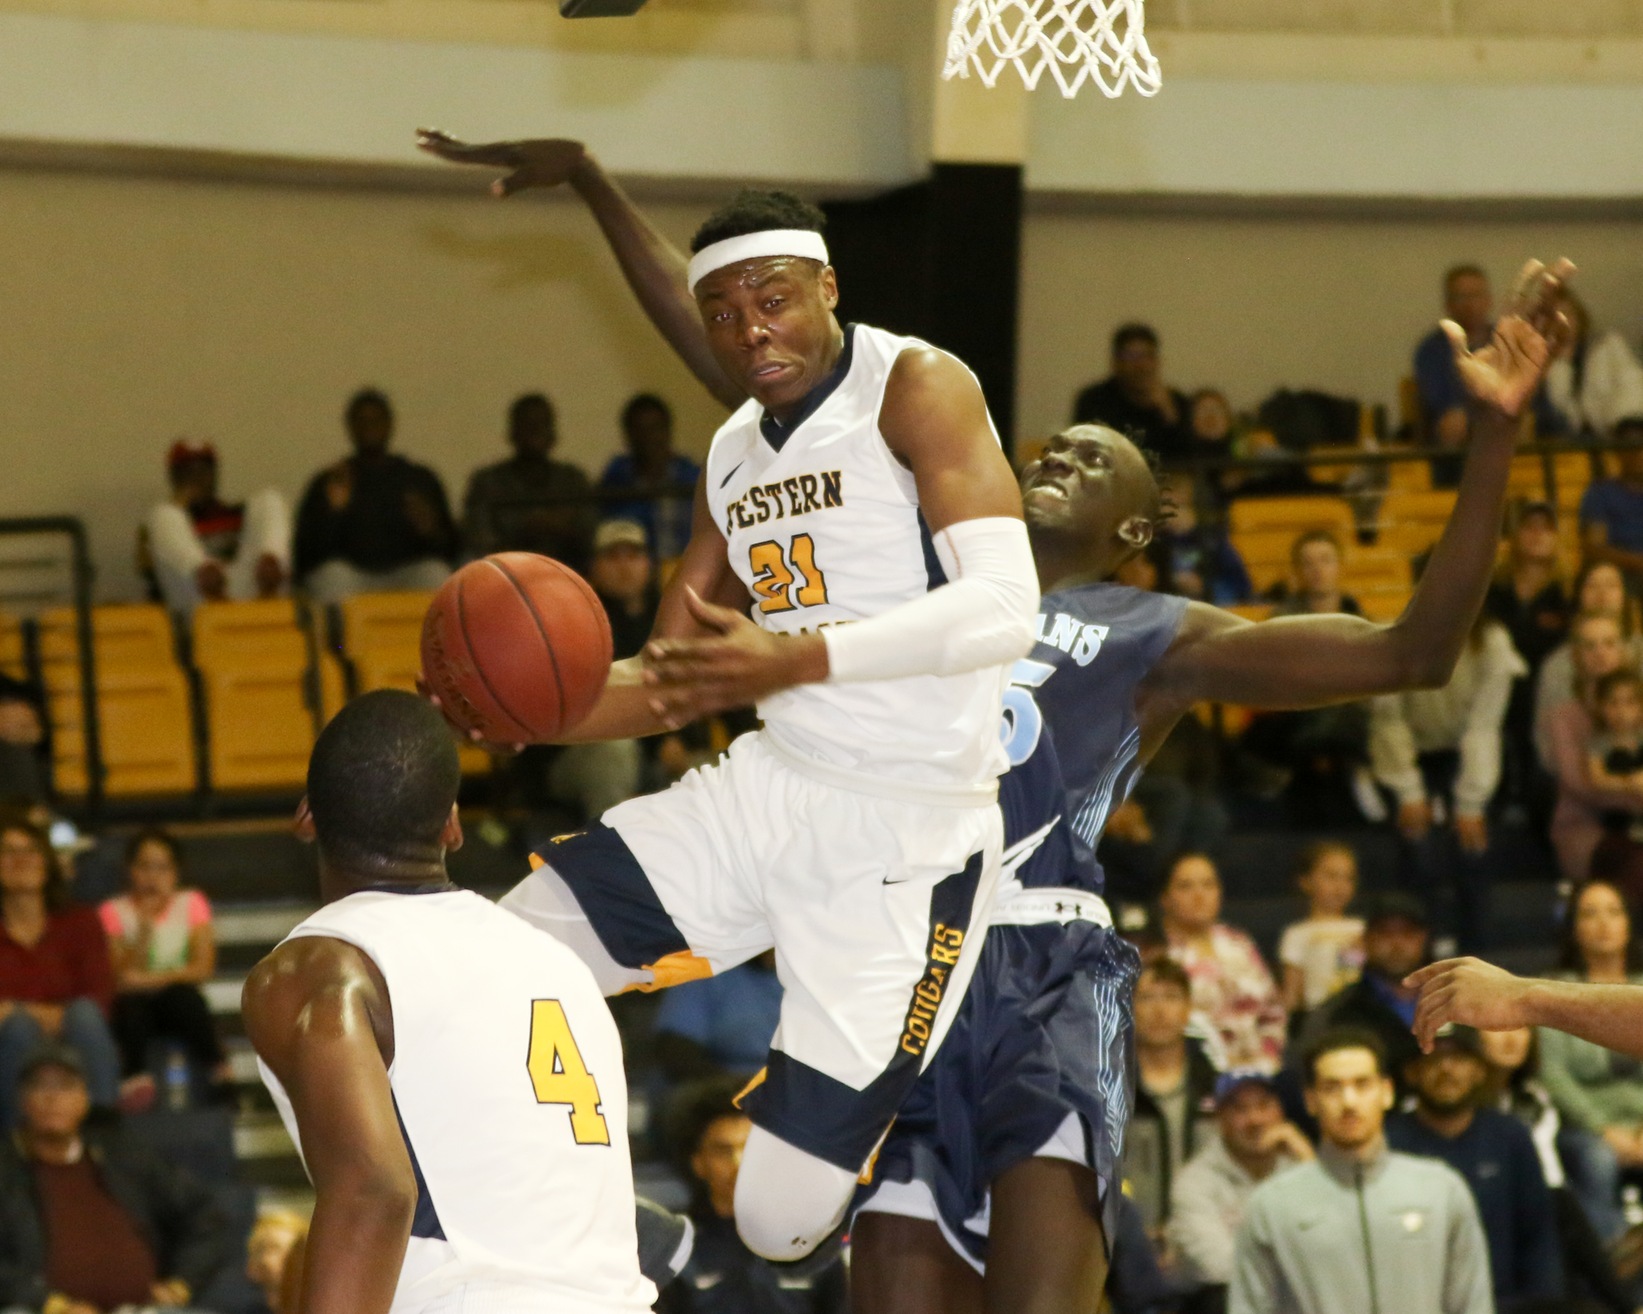 WNCC comes back to top Colby behind Green’s 30 points